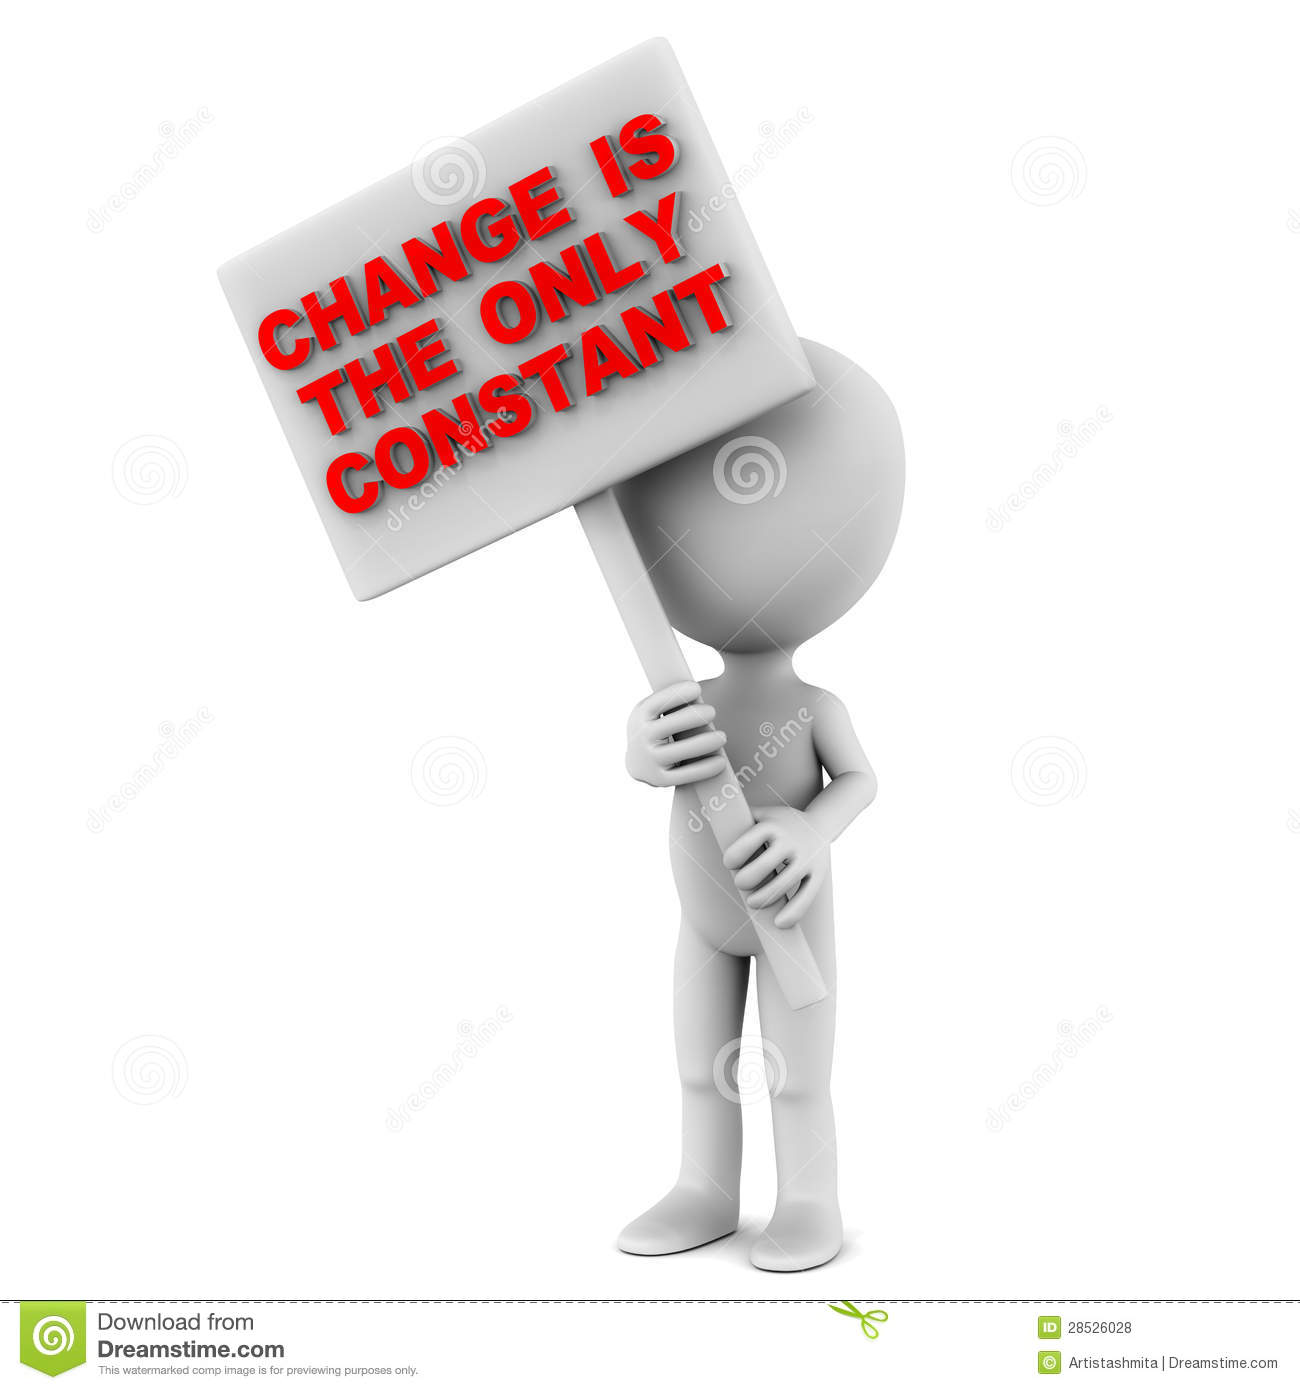 Change Is The Only Constant Text In Red Over A White Background 3d    